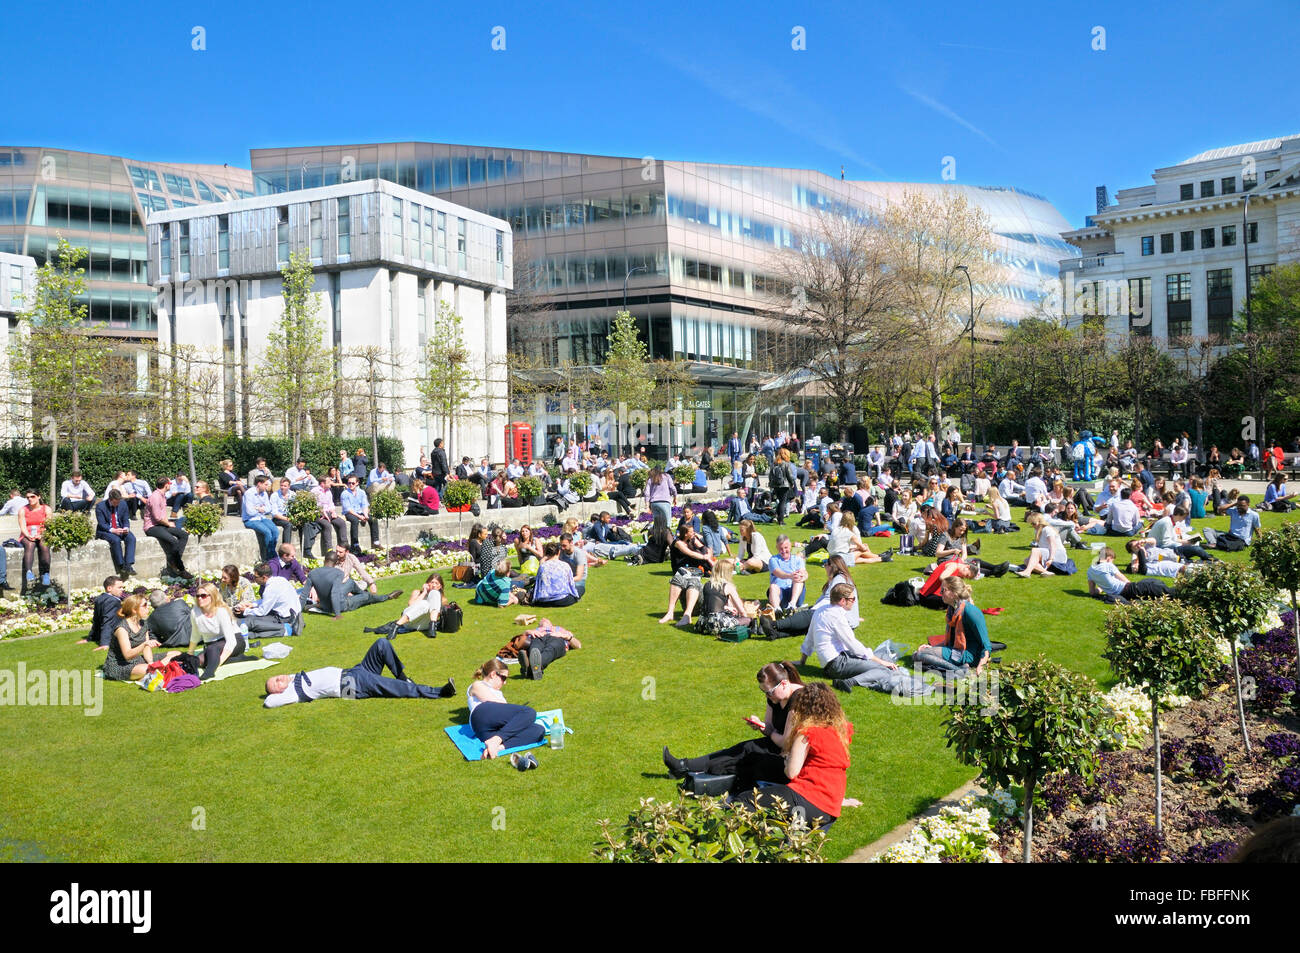 Office workers and tourists relaxing in the sunshine at Festival Gardens by St Paul's Cathedral, City of London, UK Stock Photo